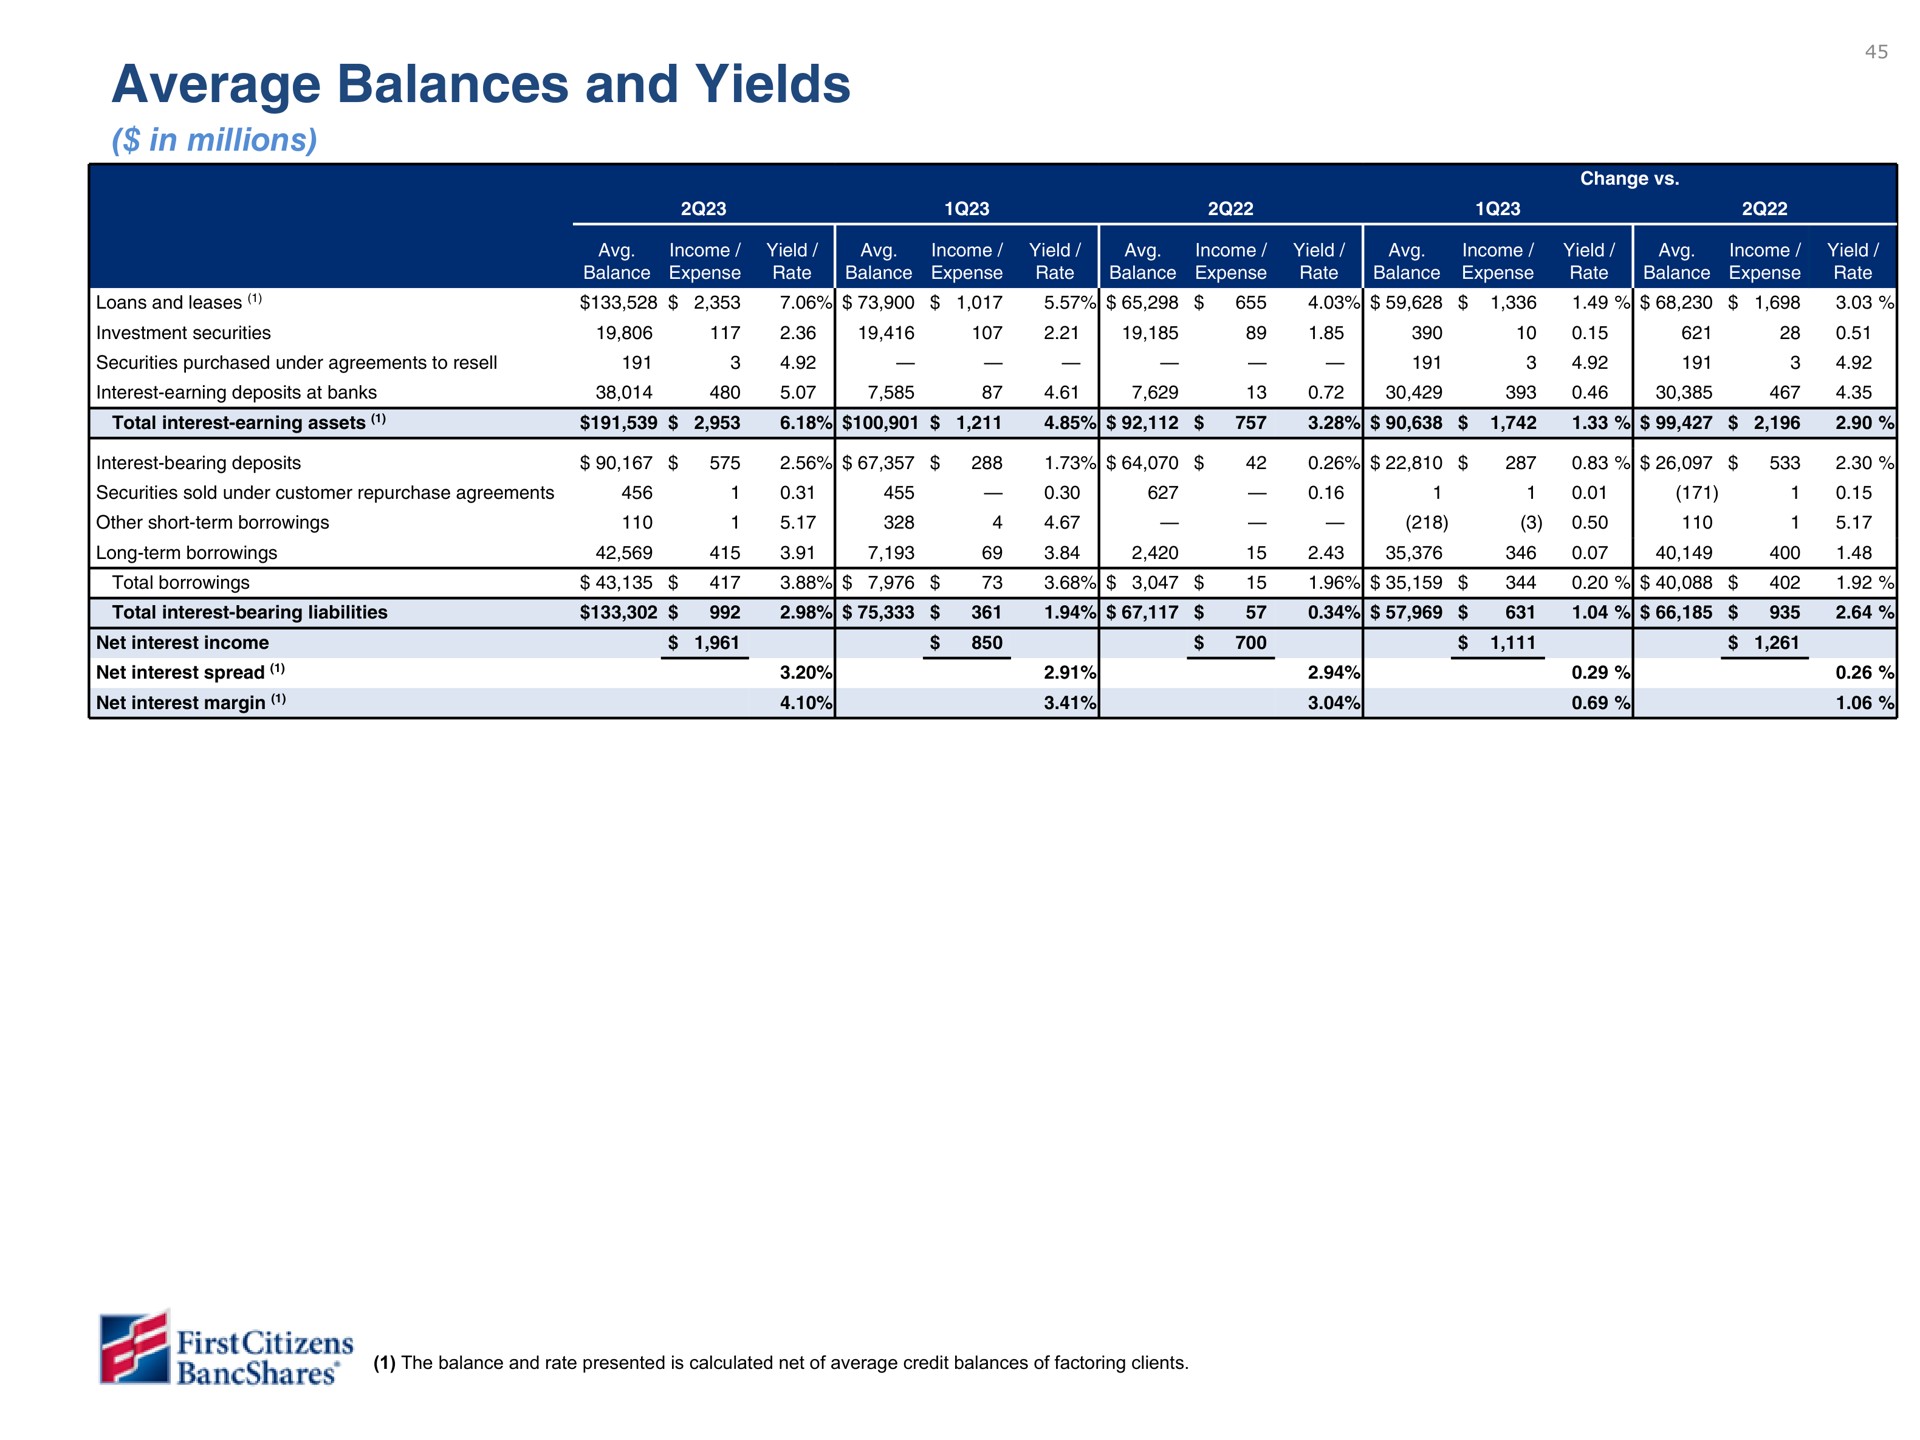 average balances and yields | First Citizens BancShares